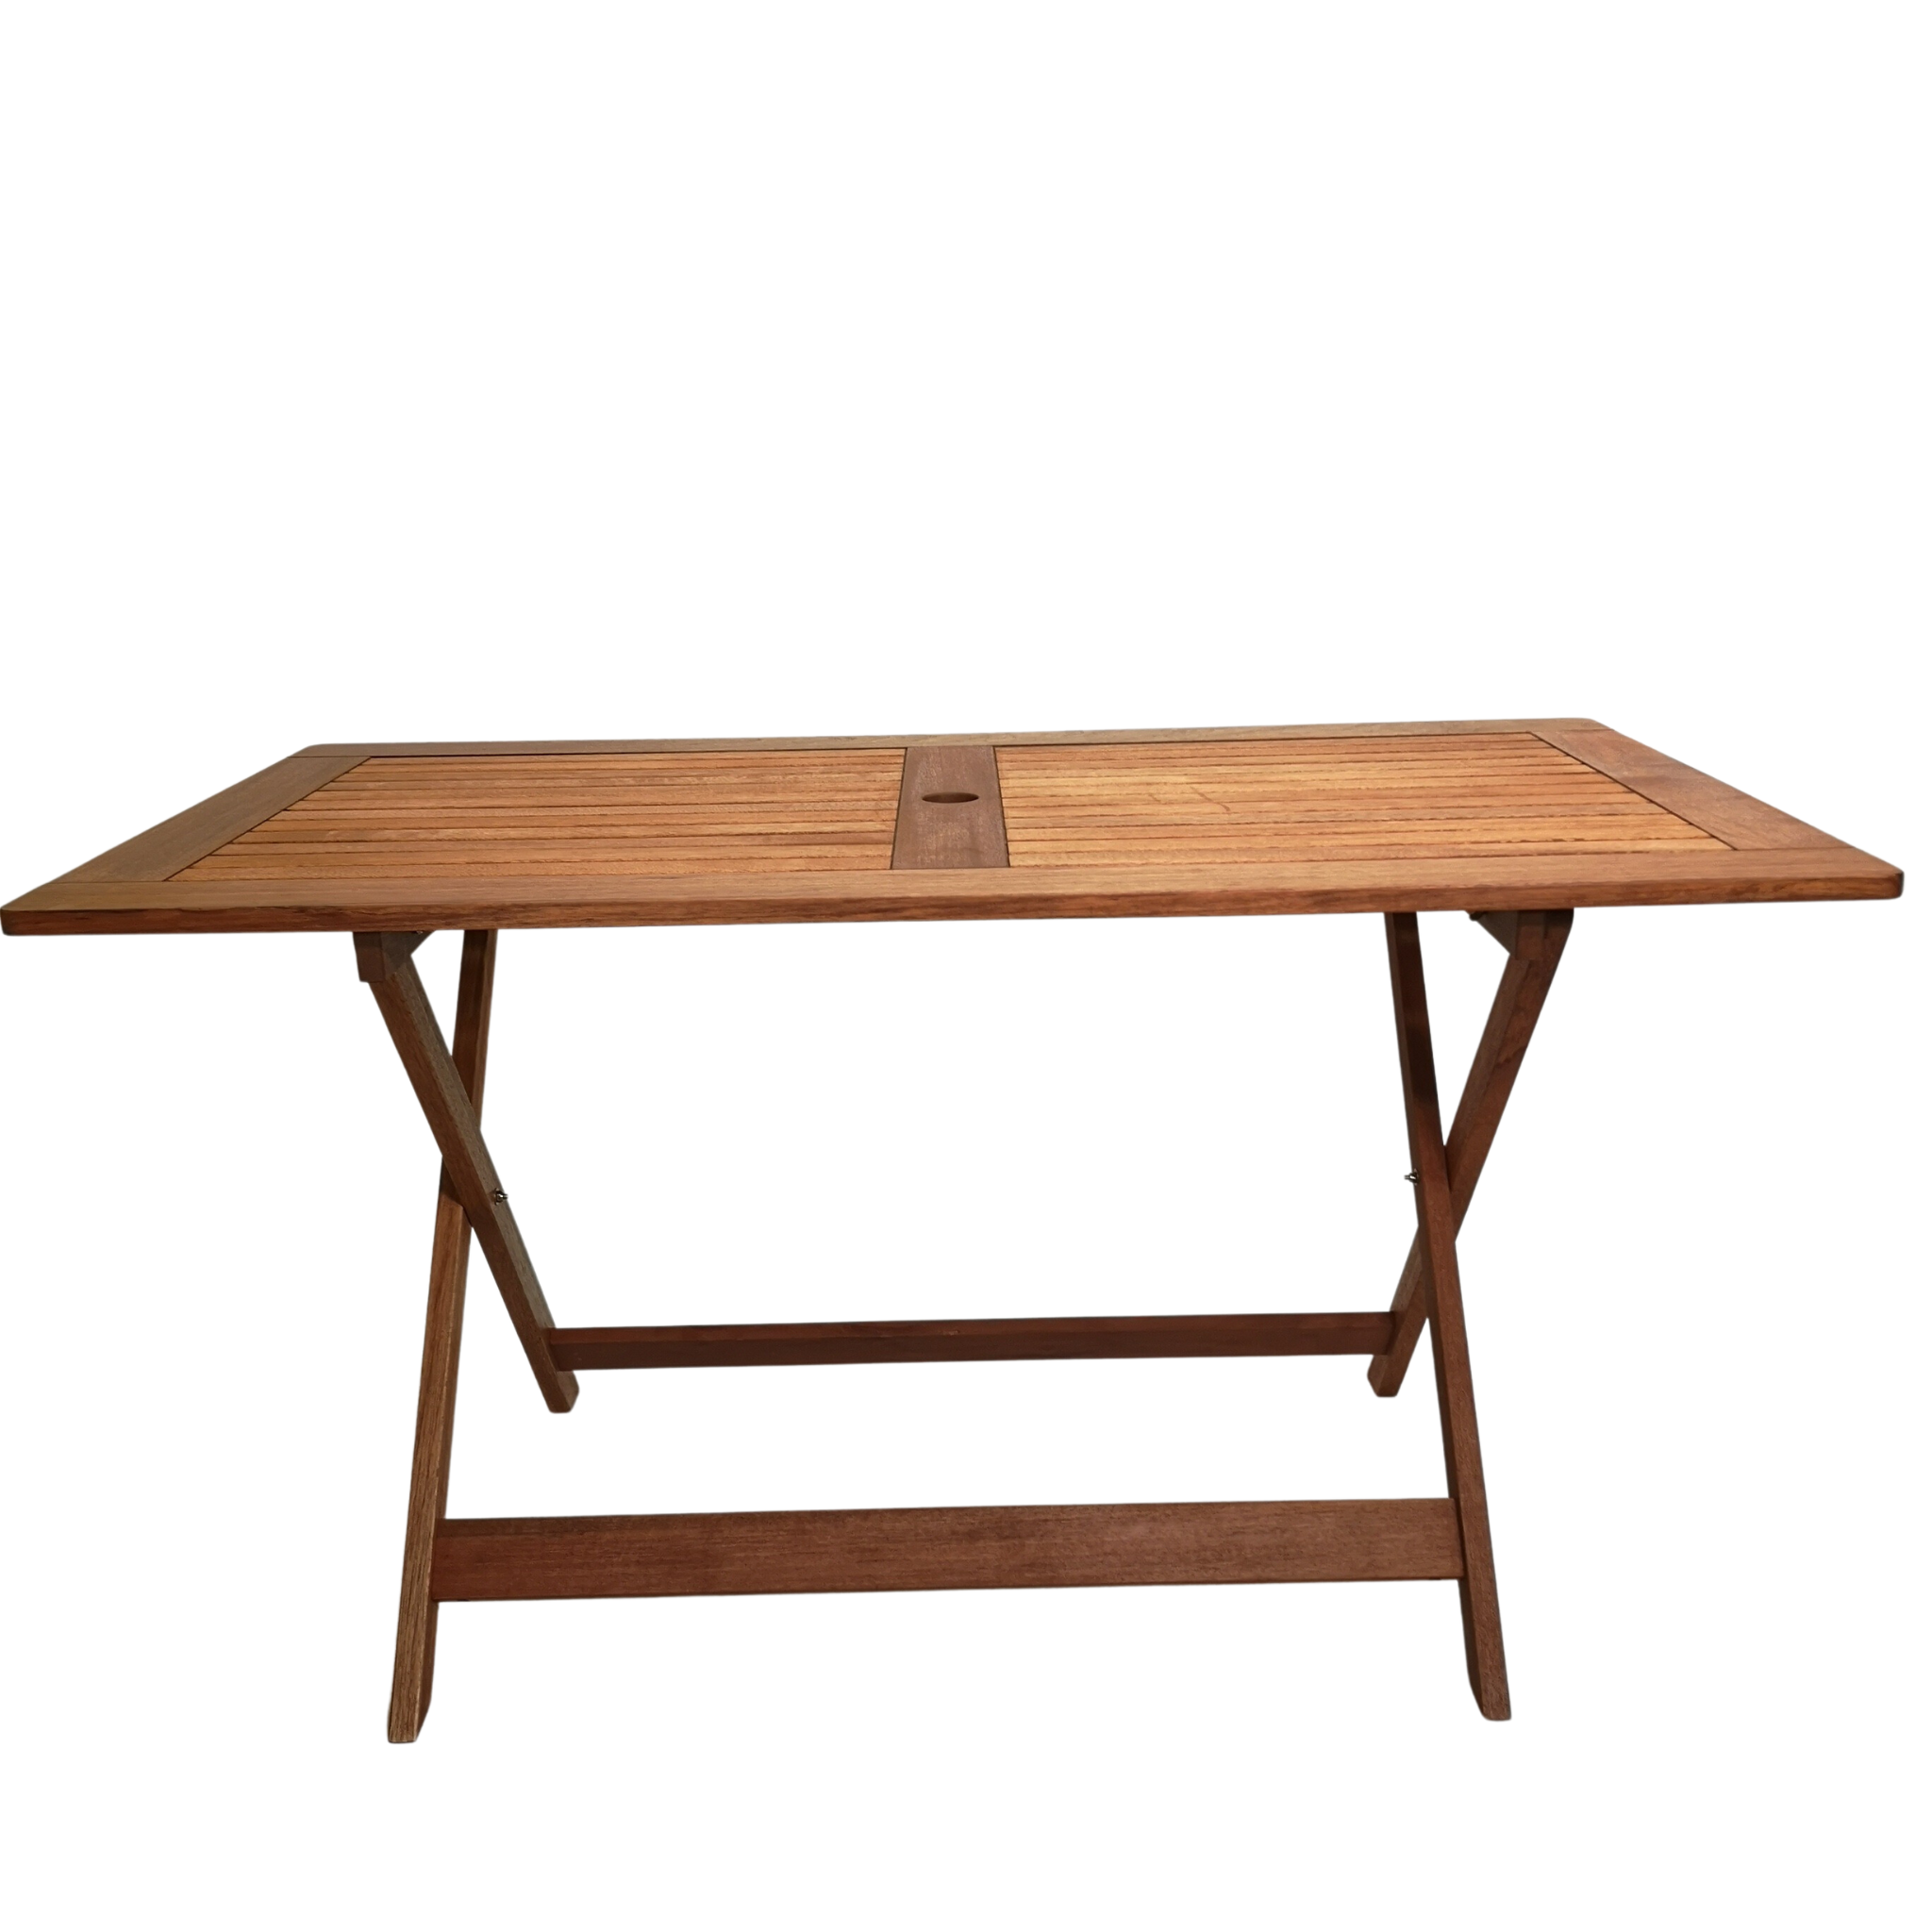 Windermere Outdoor 6 Person Folding Rectangular Wooden Table